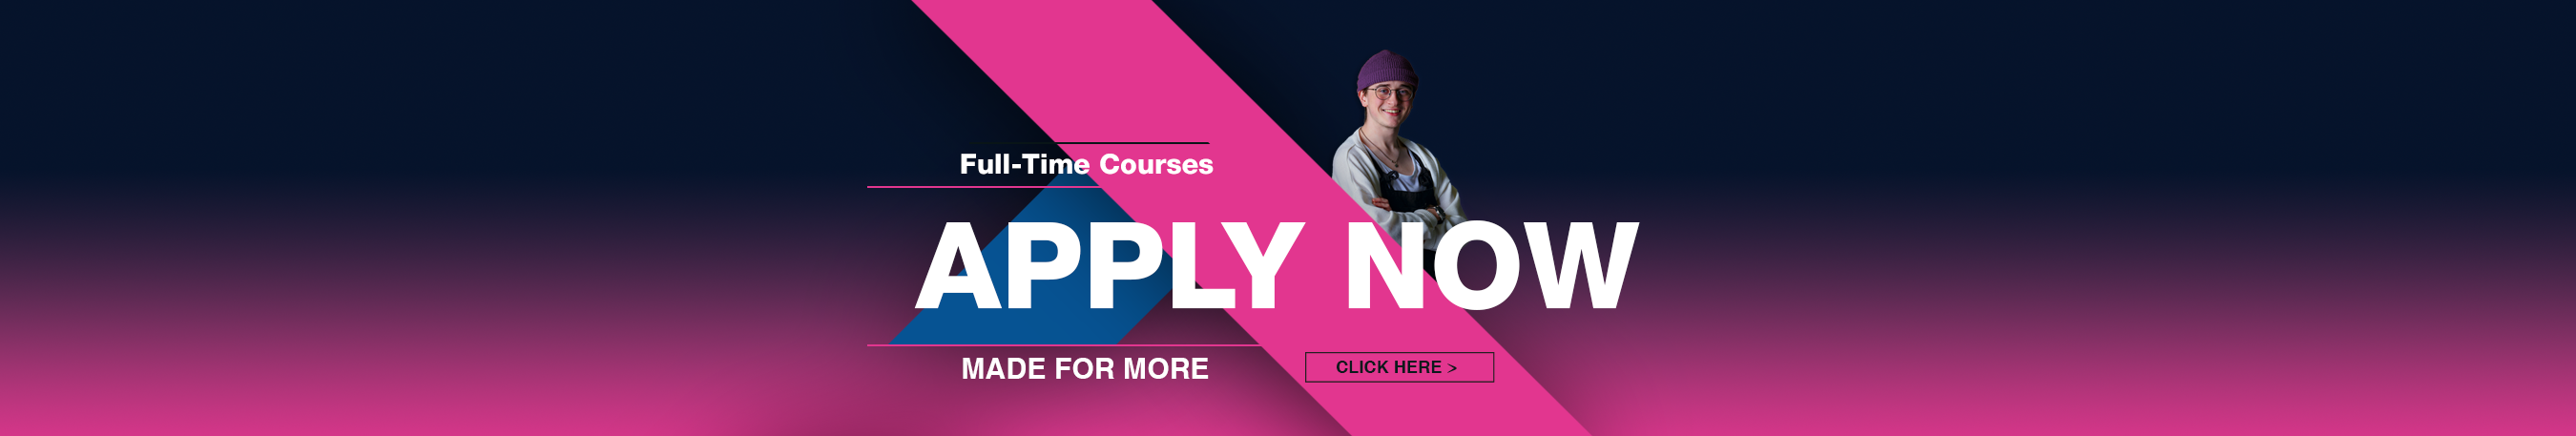 Full-Time Courses, made for more, apply now